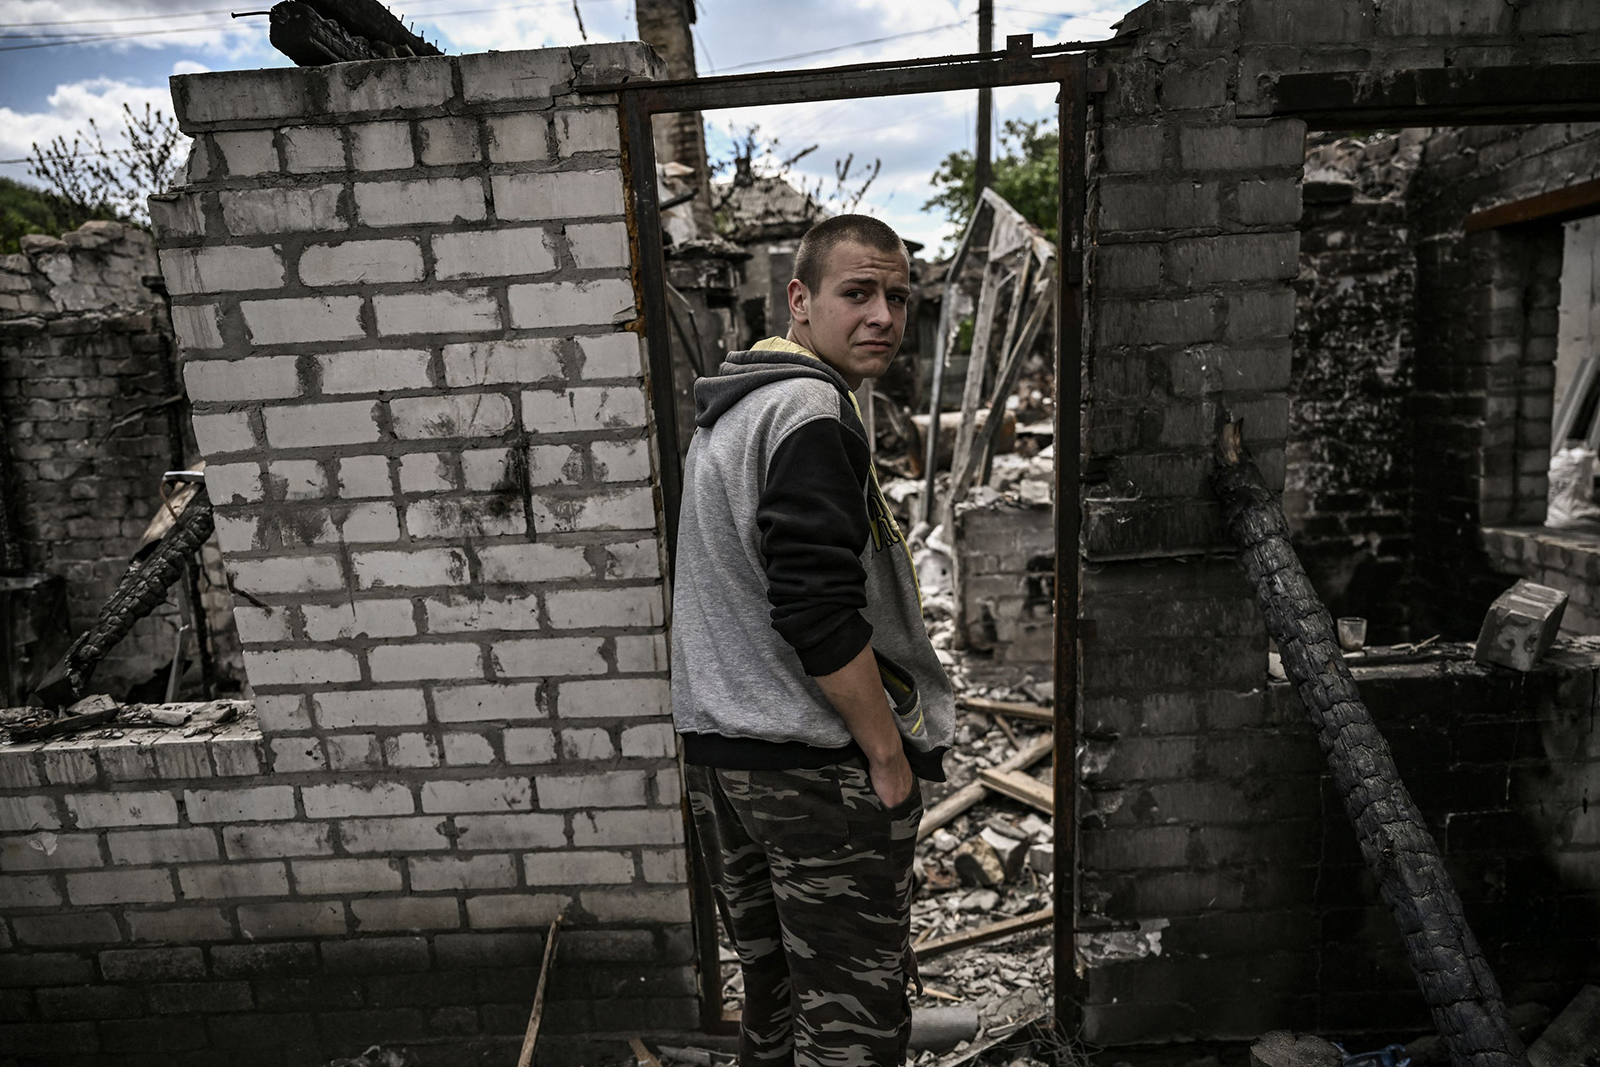 Ivan Sosnin, 19, stands in front of his destroyed house in the city of Lysychansk at the eastern Ukrainian region of Donbas on June 7.